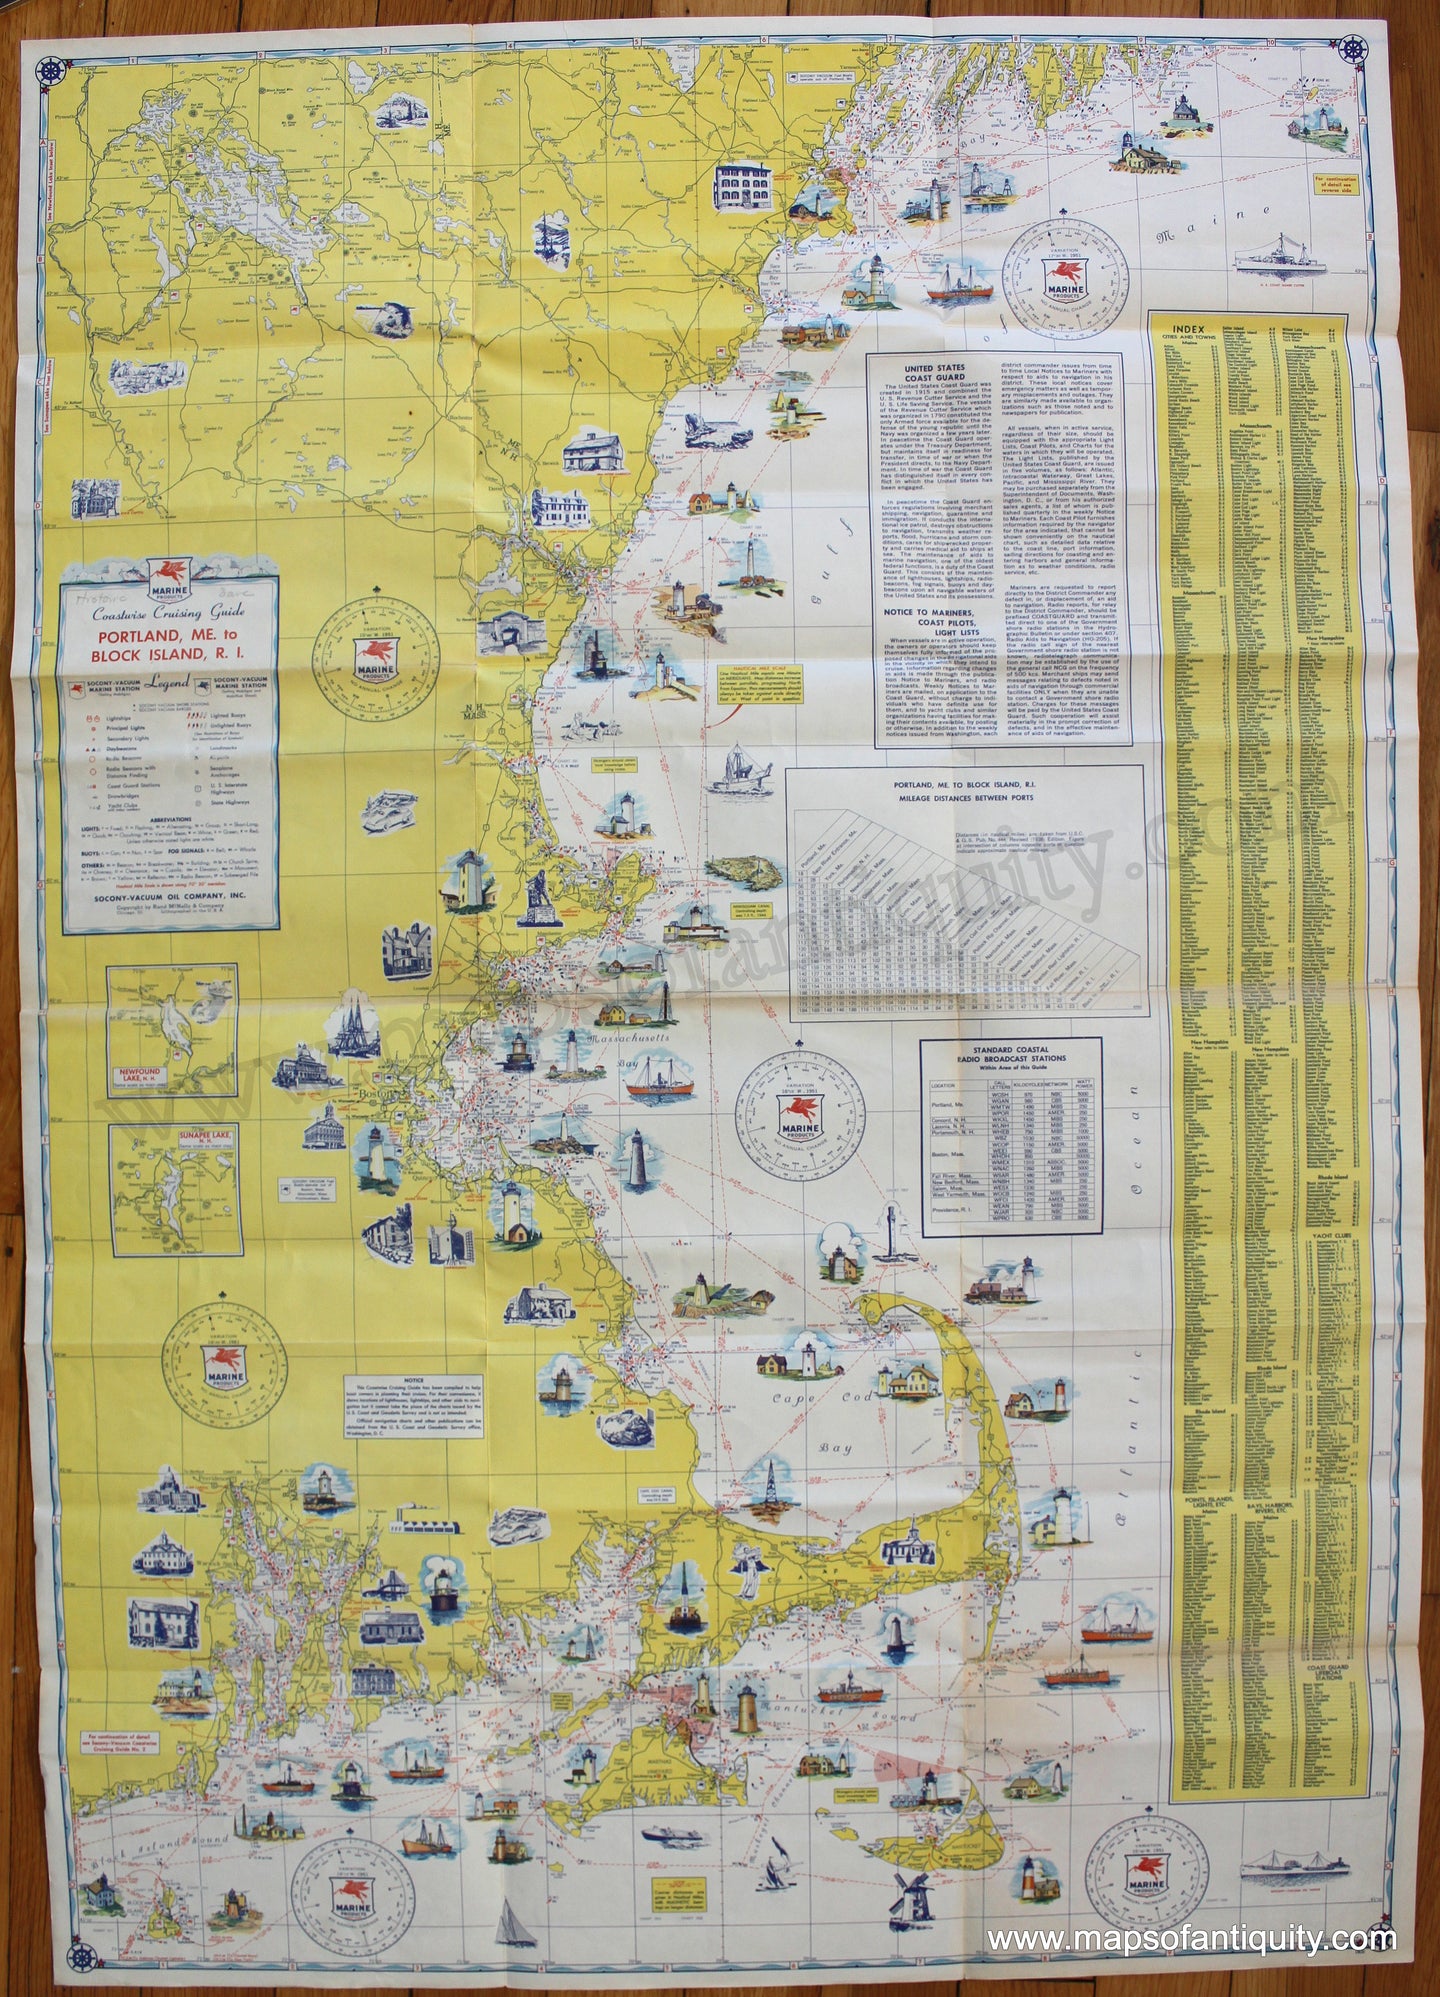 Antique-Pictorial-Chart-Coastwise-Cruising-Guide-No.-1-Eastport-ME.-to-Block-Island-R.I.-1940s-Socony-Vacuum-Oil-/-Rand-McNally---1800s-19th-century-Maps-of-Antiquity